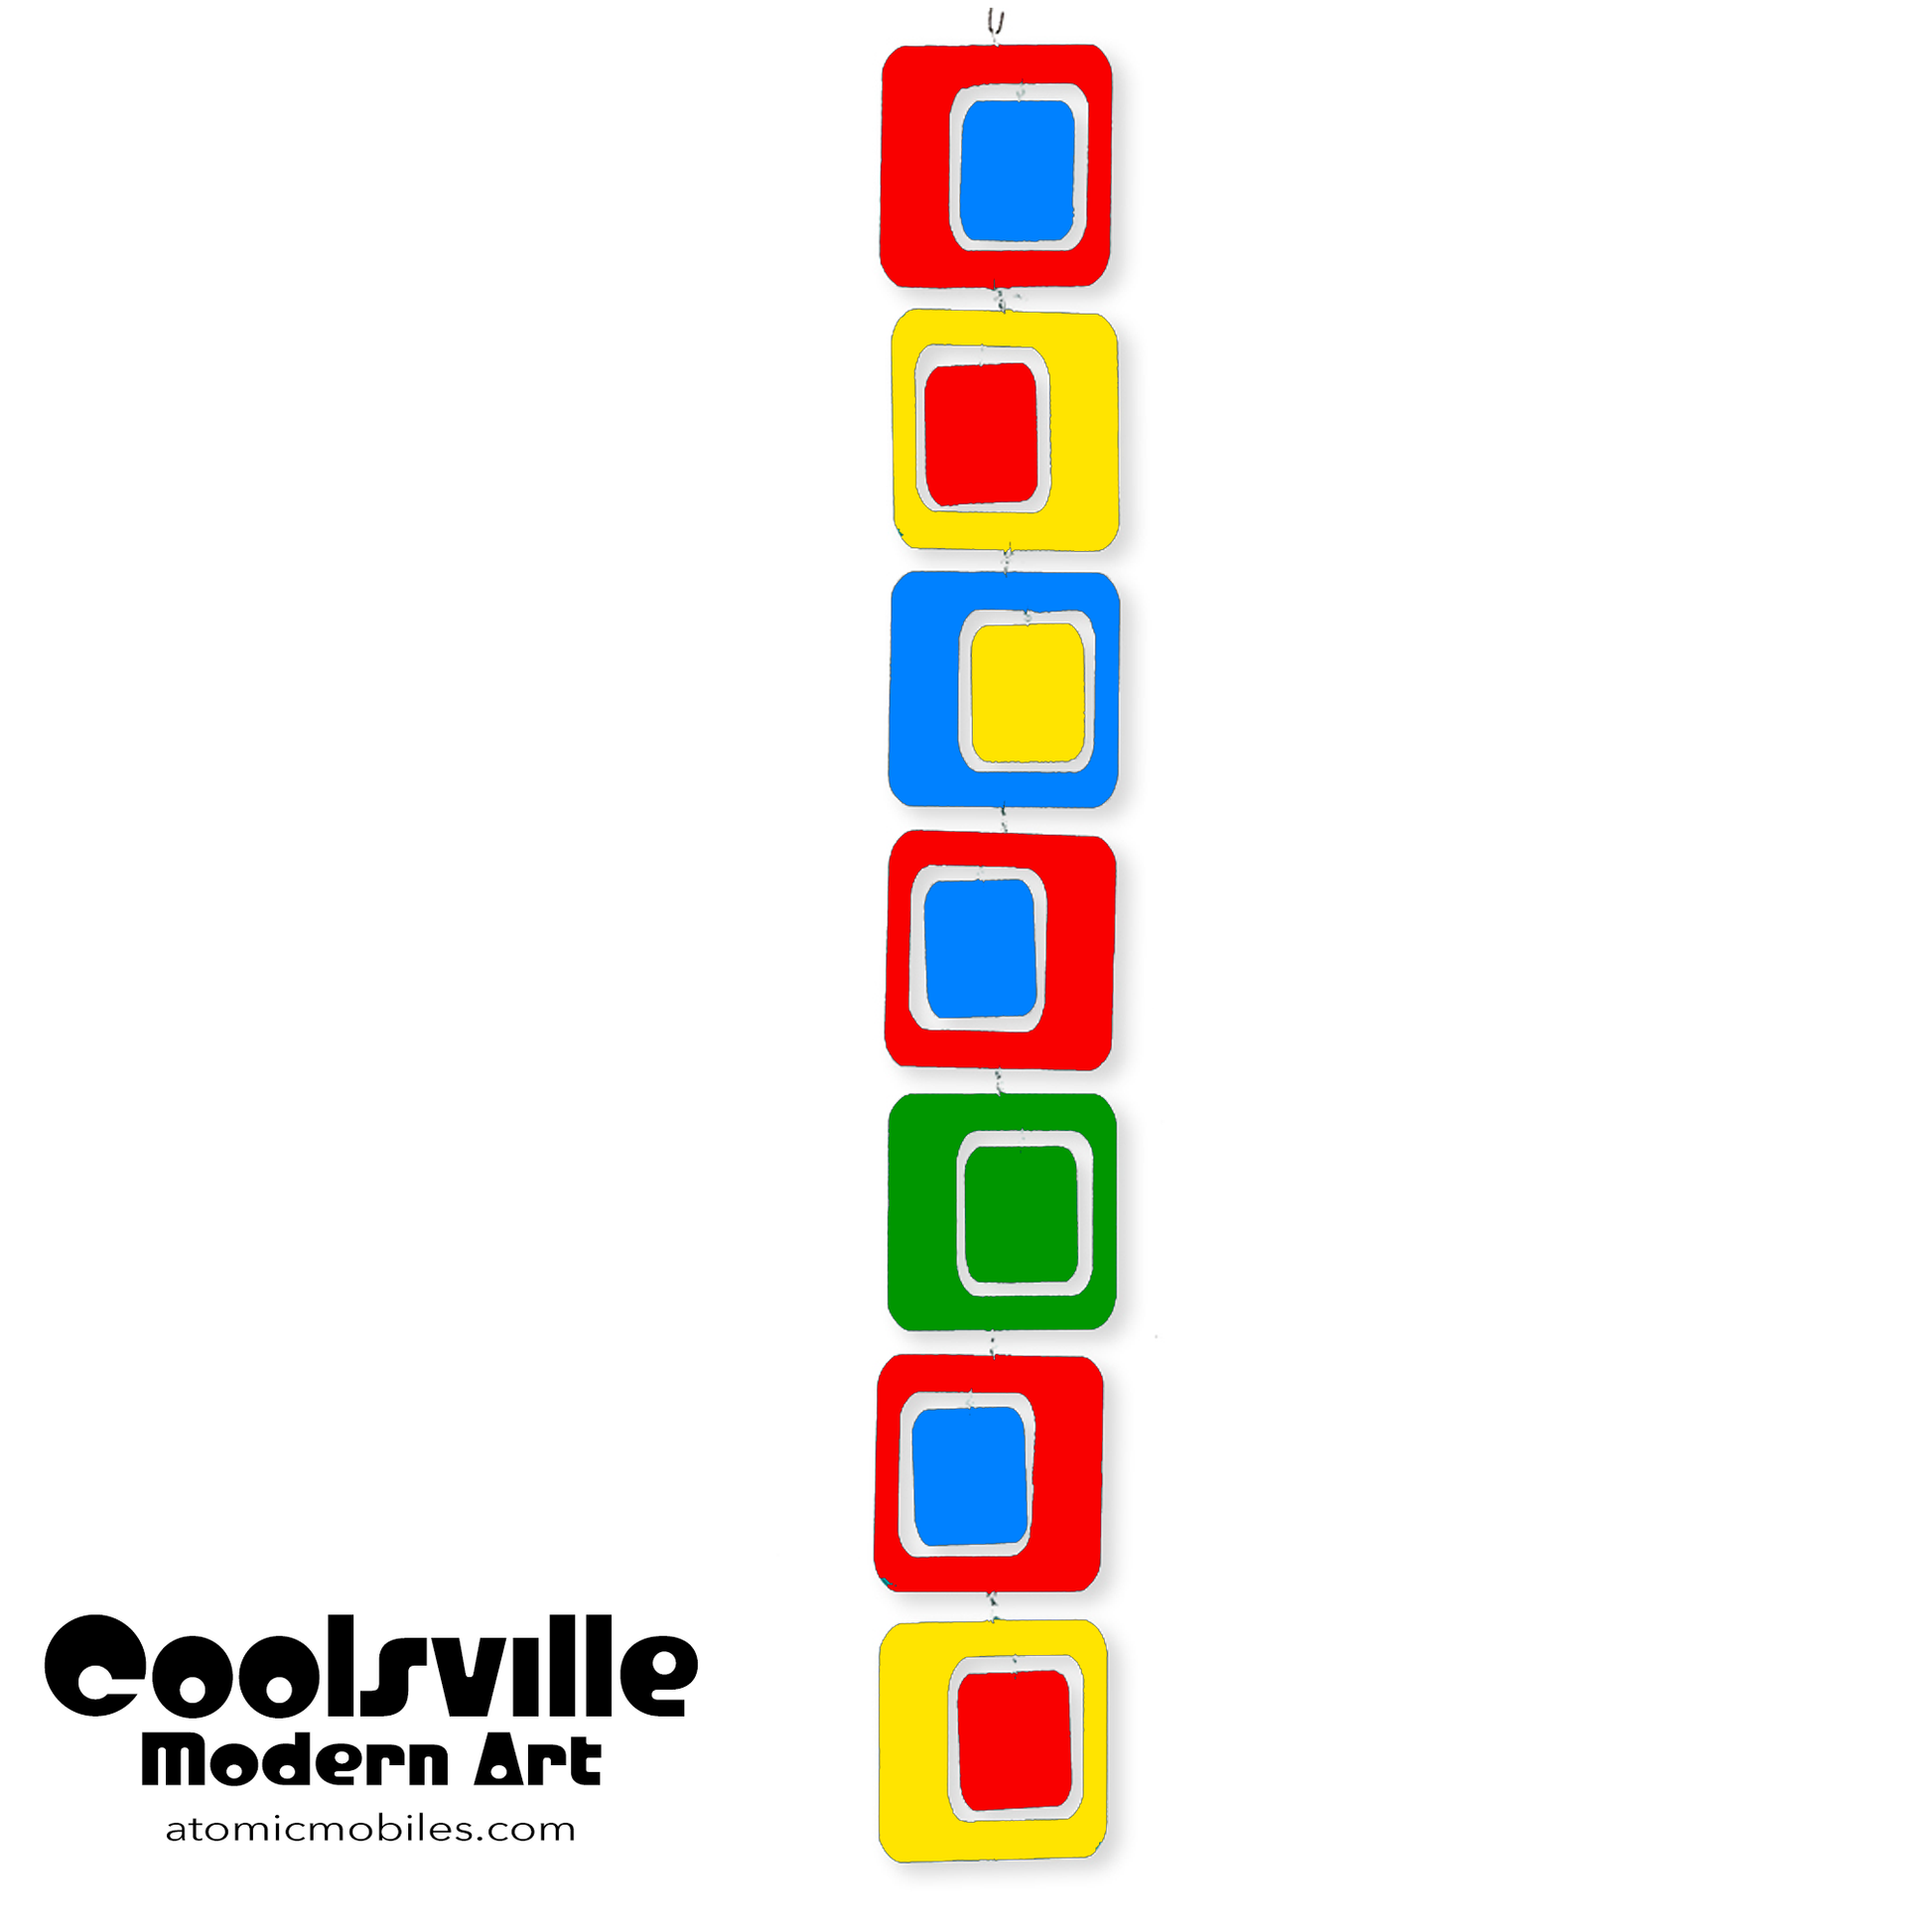 Coolsville kinetic vertical hanging art mobile in Modern Art colors of Red, Blue, Yellow, and Green by AtomicMobiles.com